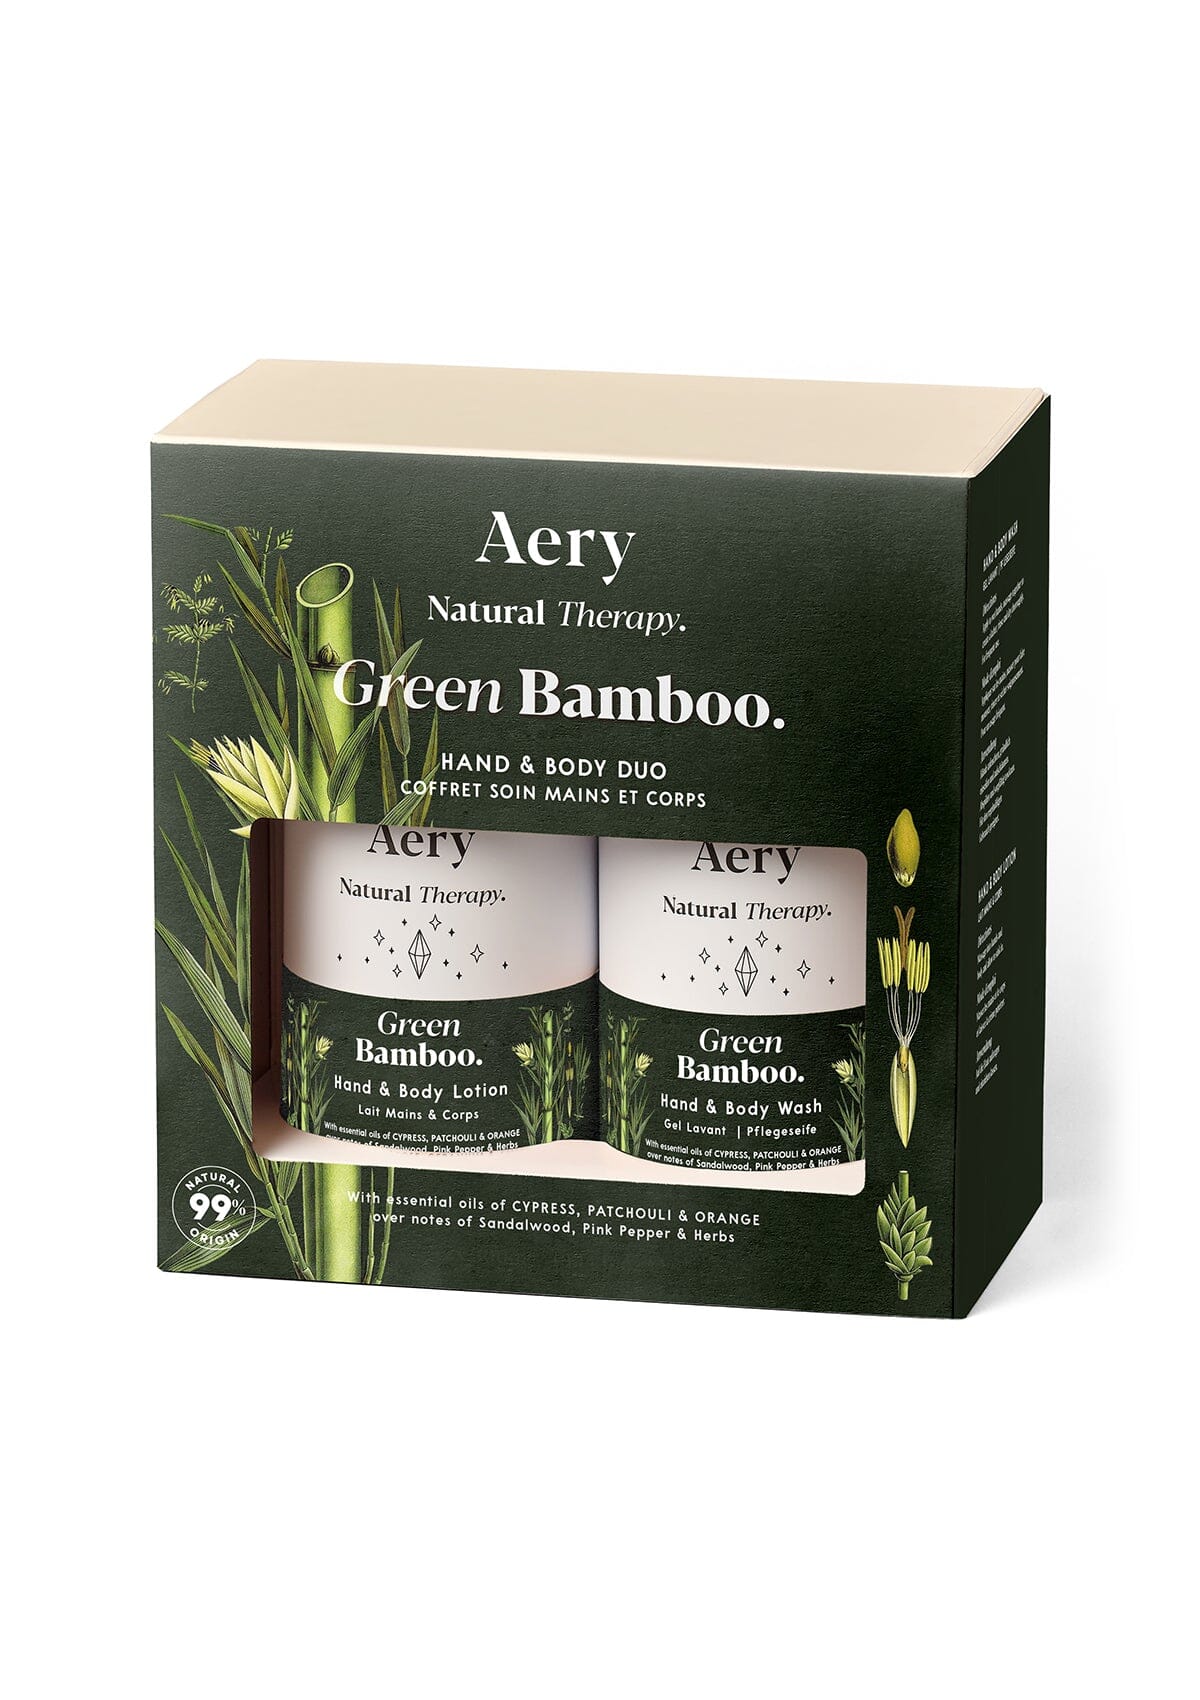 Green Bamboo  Hand and body duo displayed in product packaging by Aery on white background 